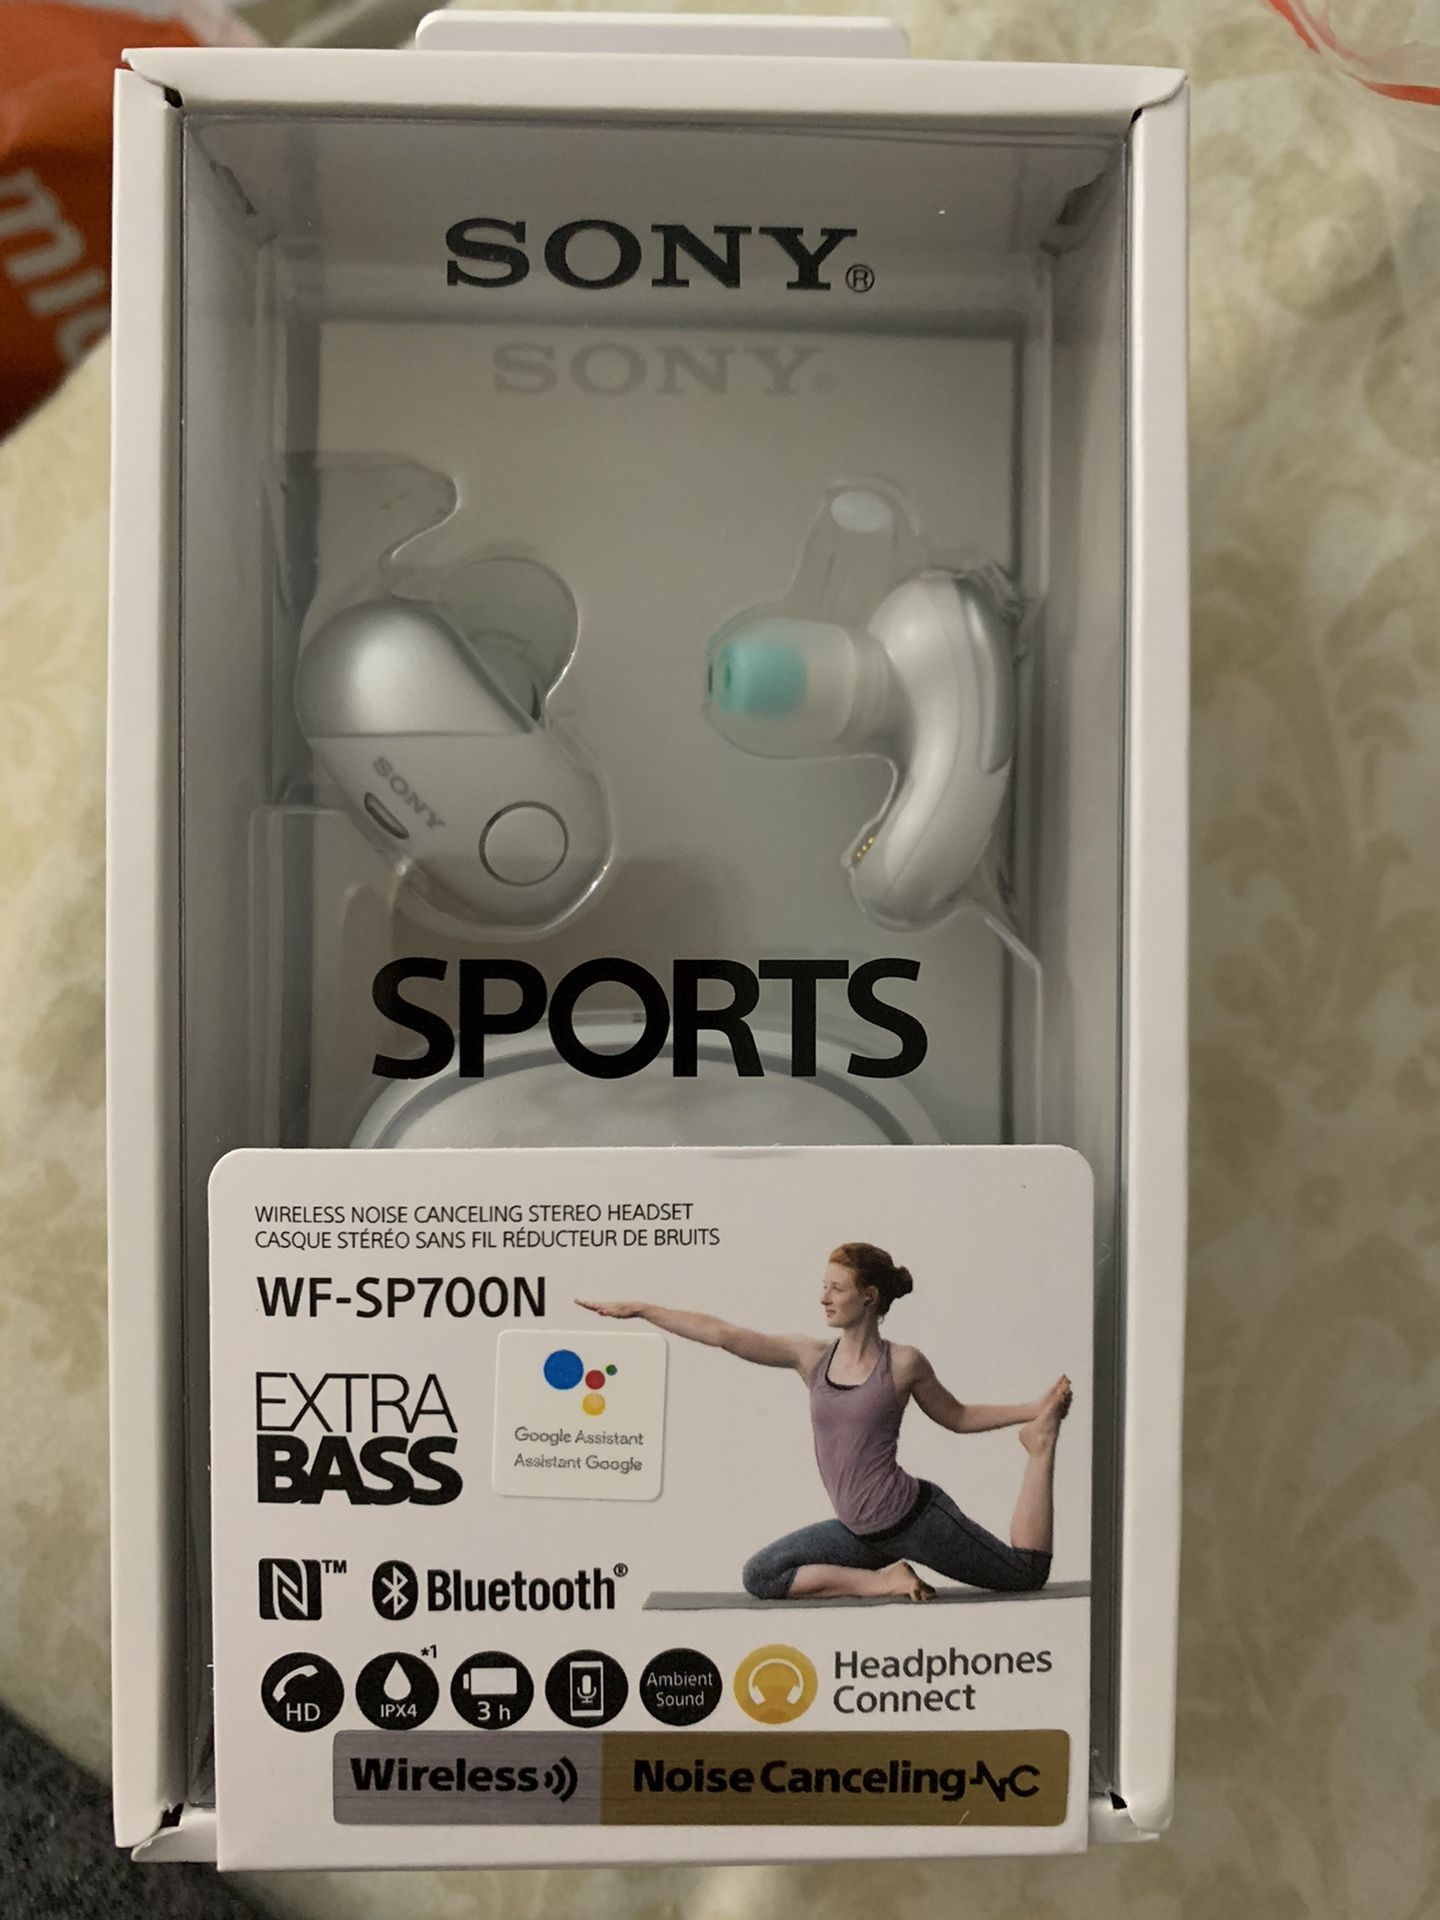 Sony Bluetooth Headphones wireless noise cancelling